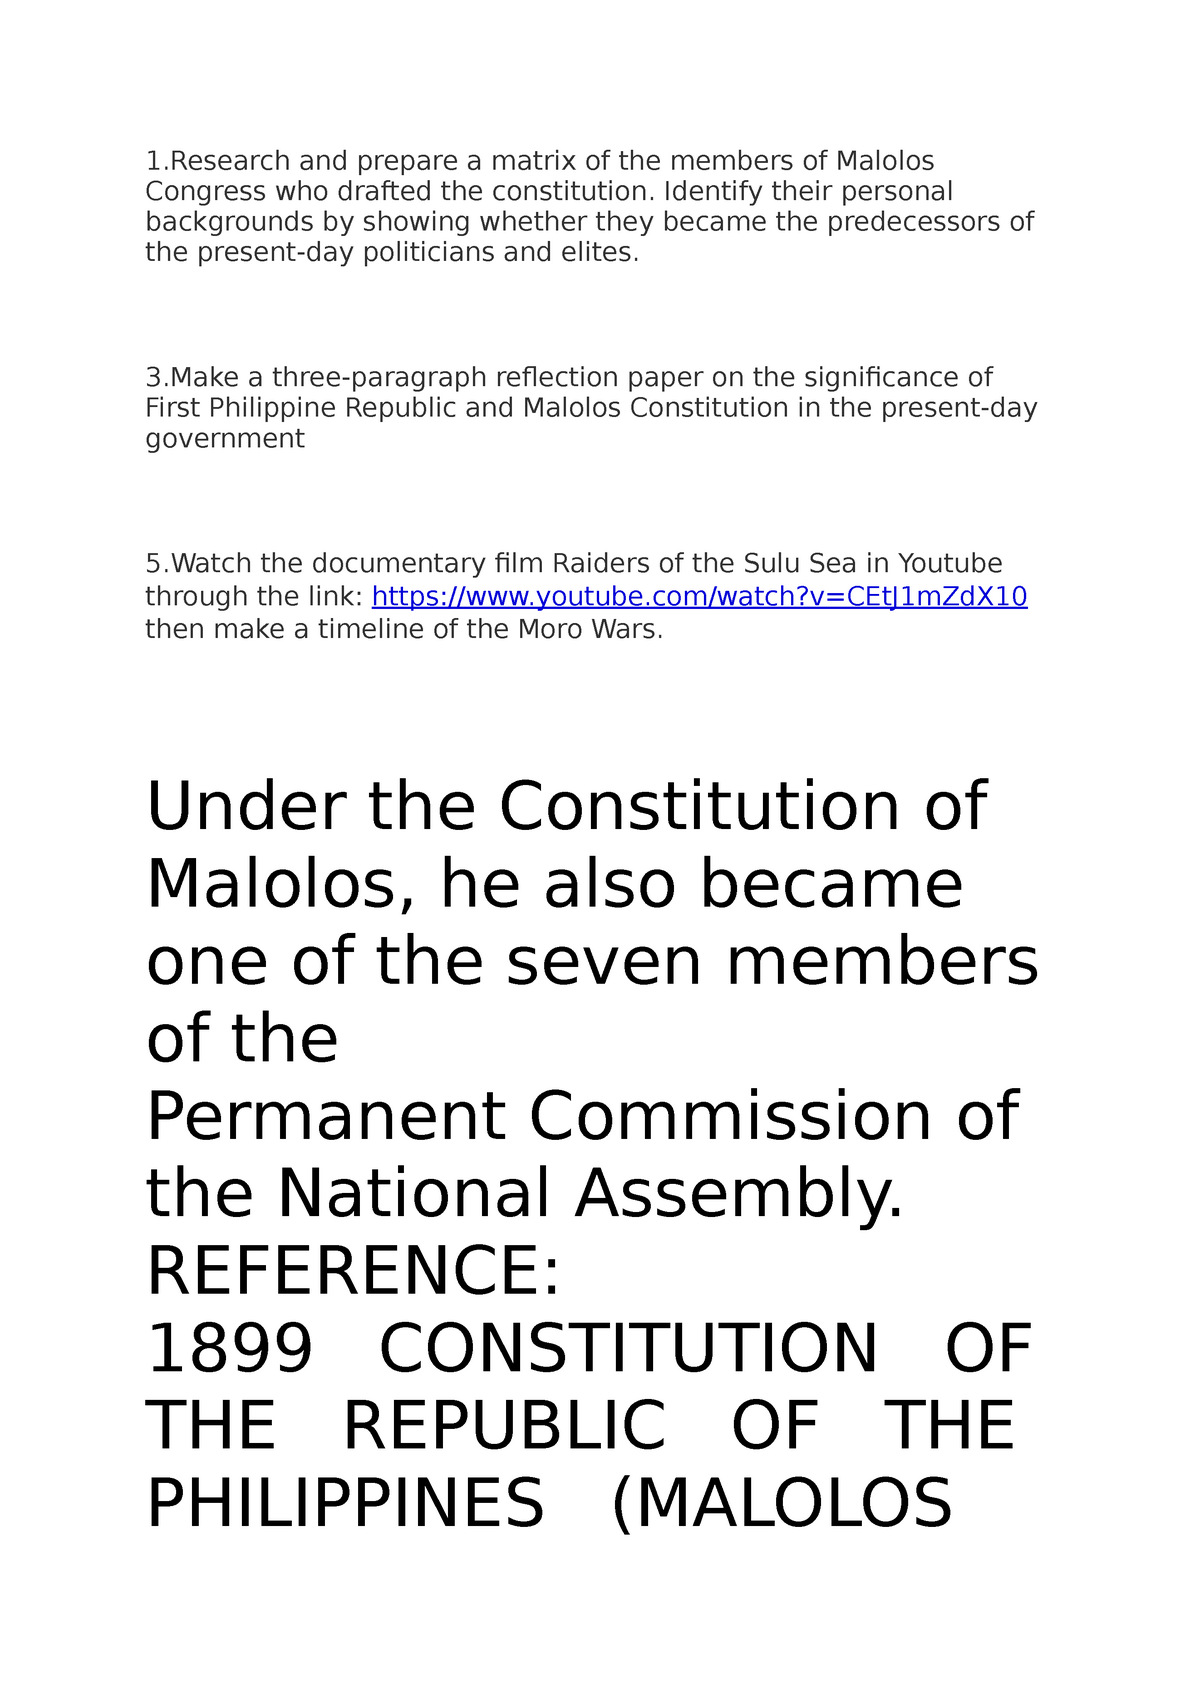 the malolos constitution essay